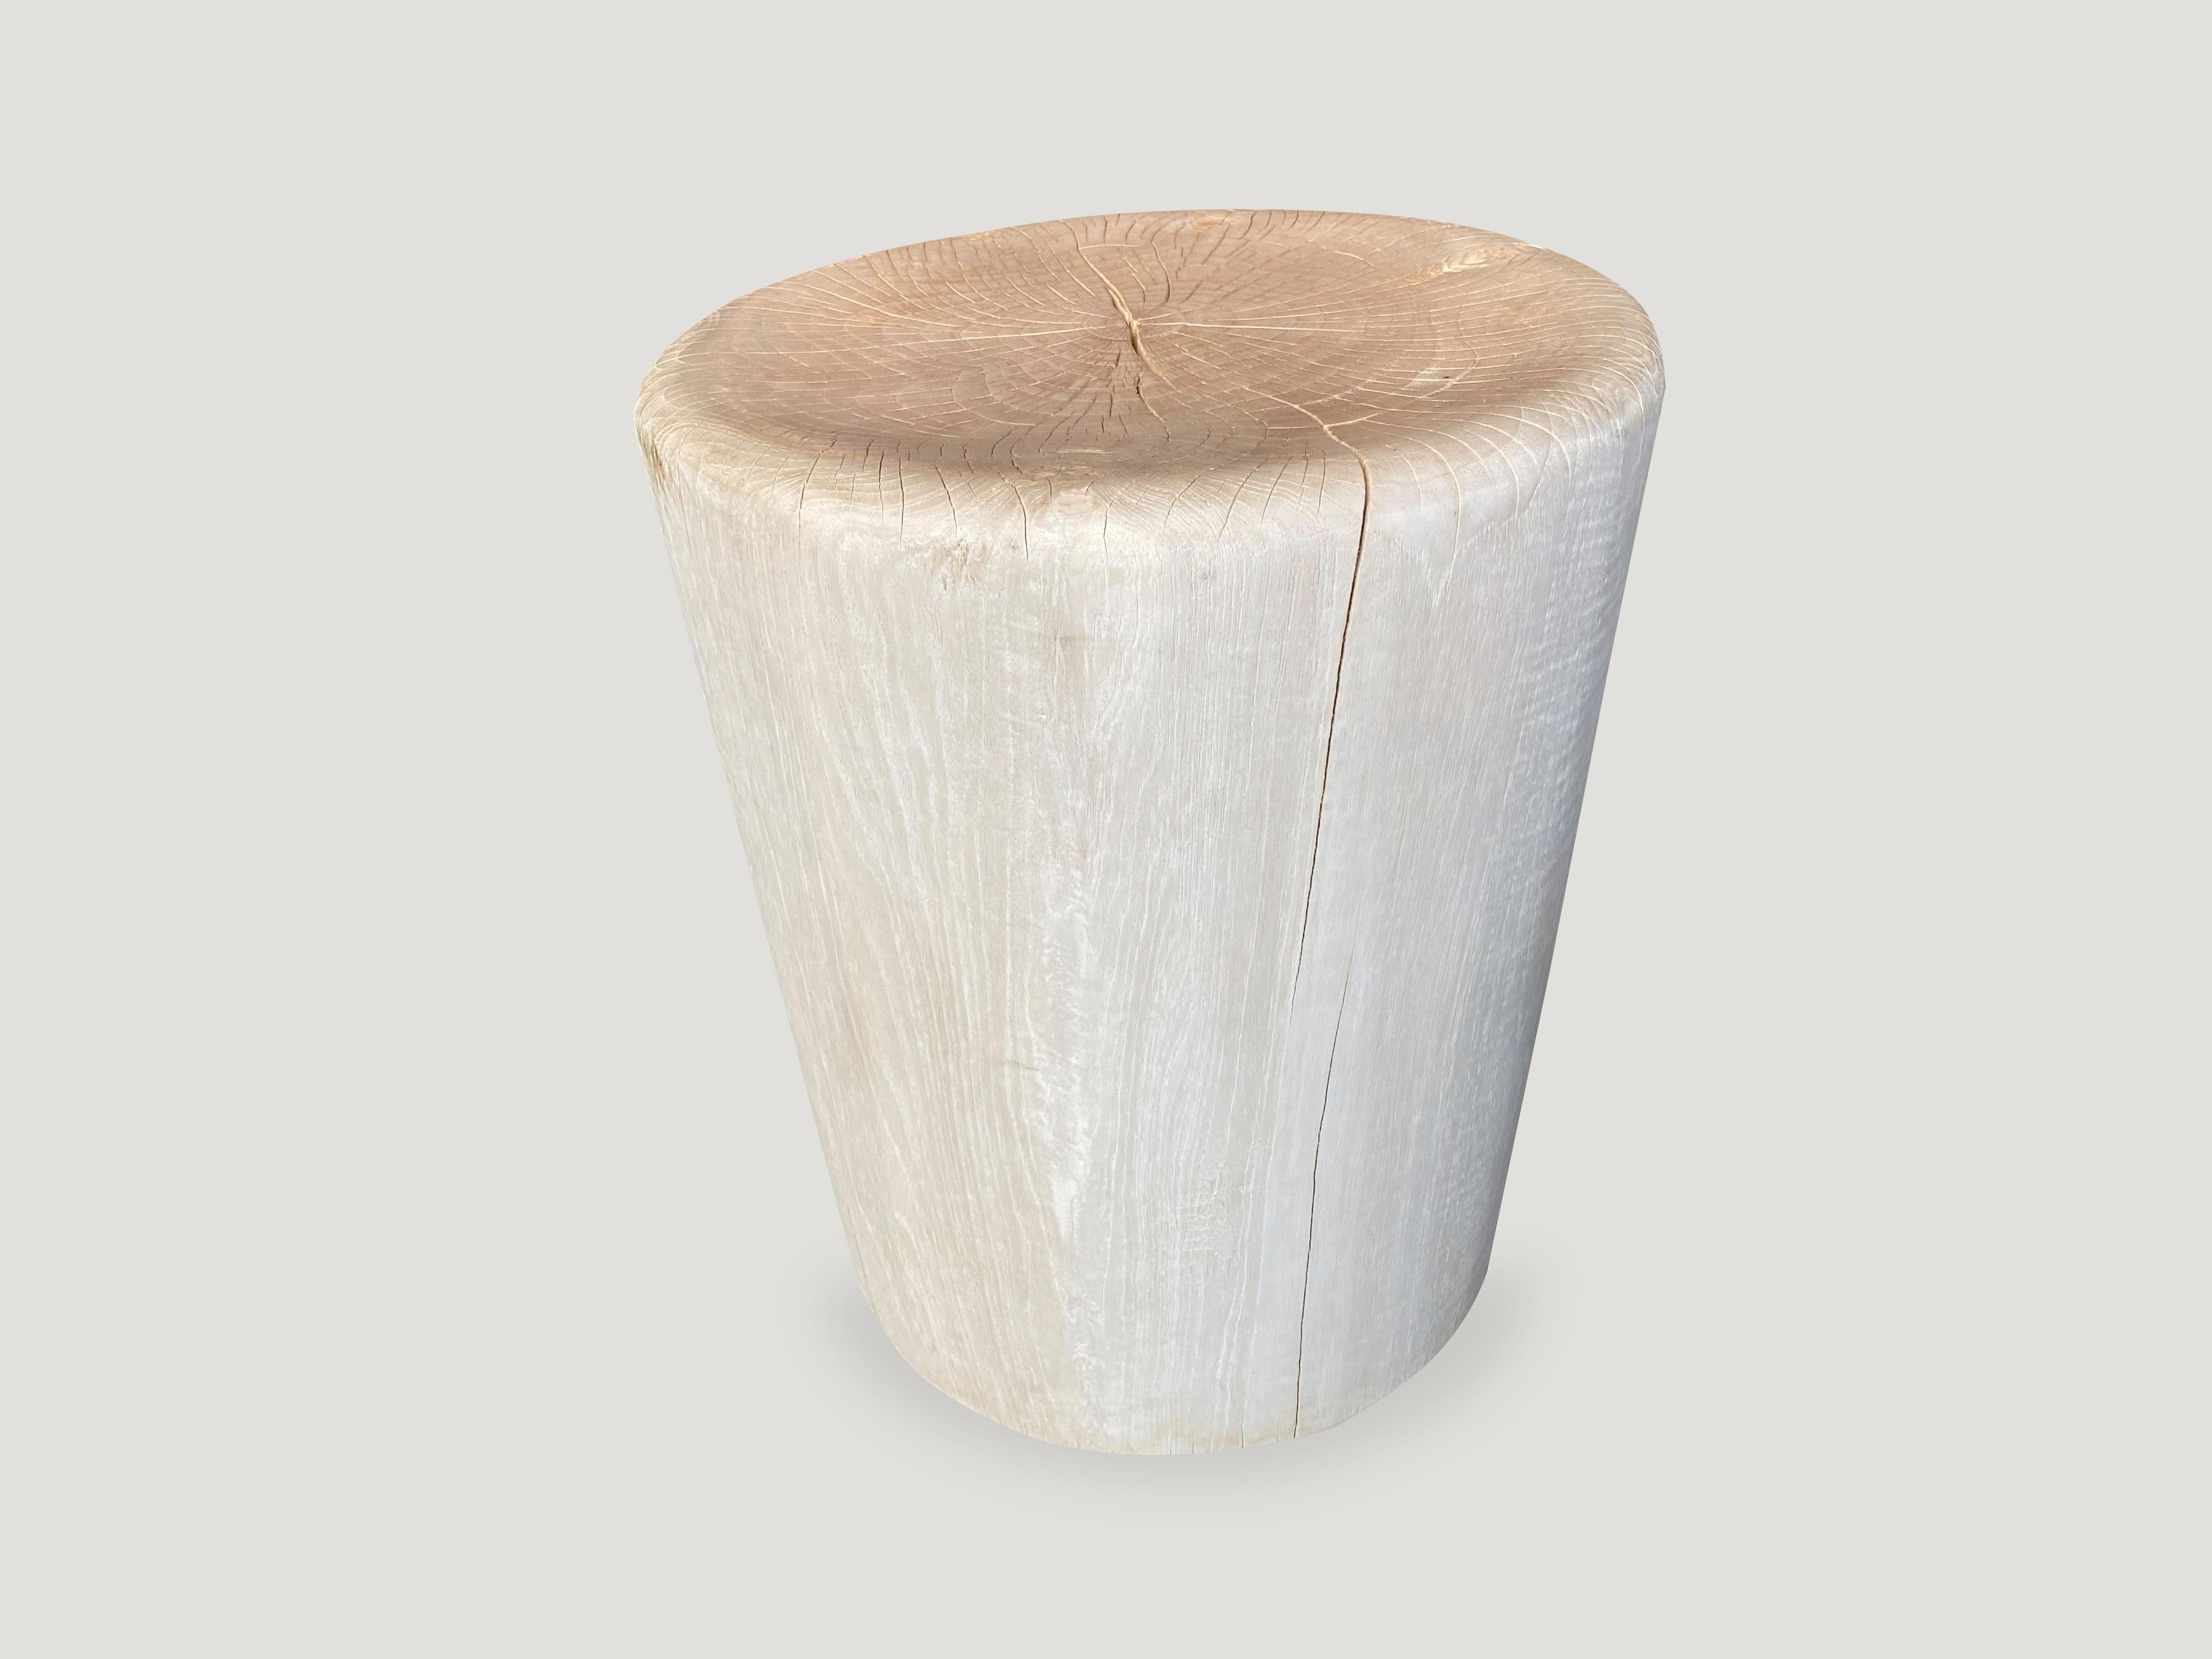 Reclaimed teak wood side table or stool. Hand carved with soft rounded sides, into a drum shape whilst respecting the natural organic wood. Bleached to a bone finish. There is a slight graduation from the bottom to the top. Also available